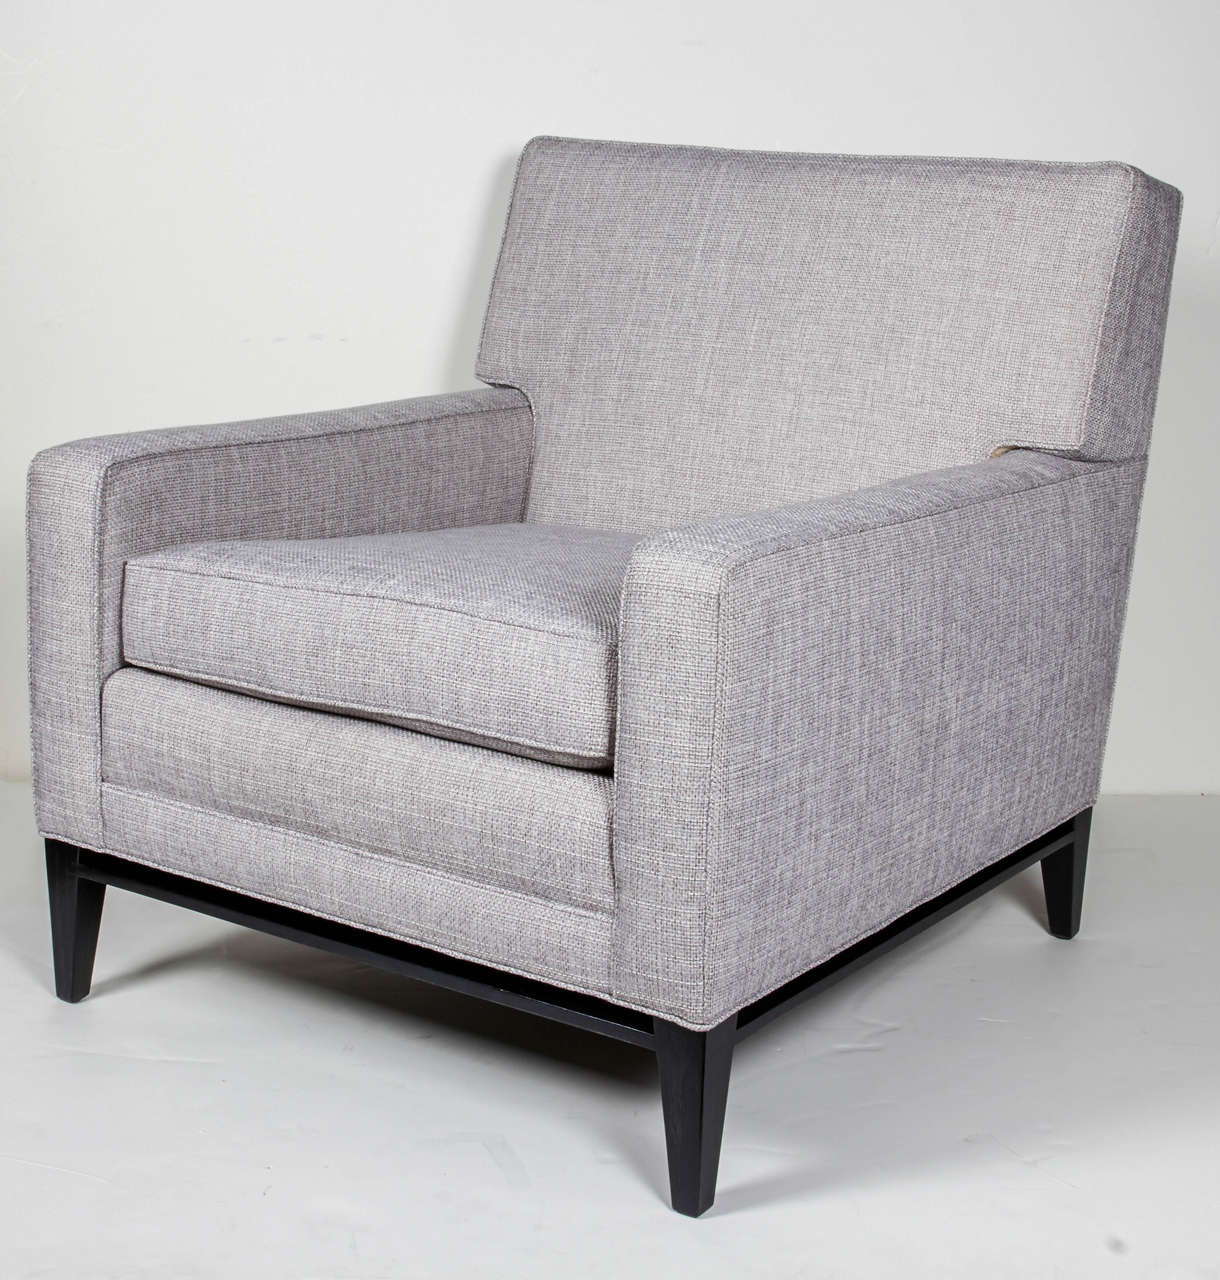 Modernist club chair and matching ottoman set. Mid-Century design with streamline form, consisting of clean lines and elegant profile. Newly upholstered in a grey or white woven basket weave fabric with simple self-welt details. Legs and bases are